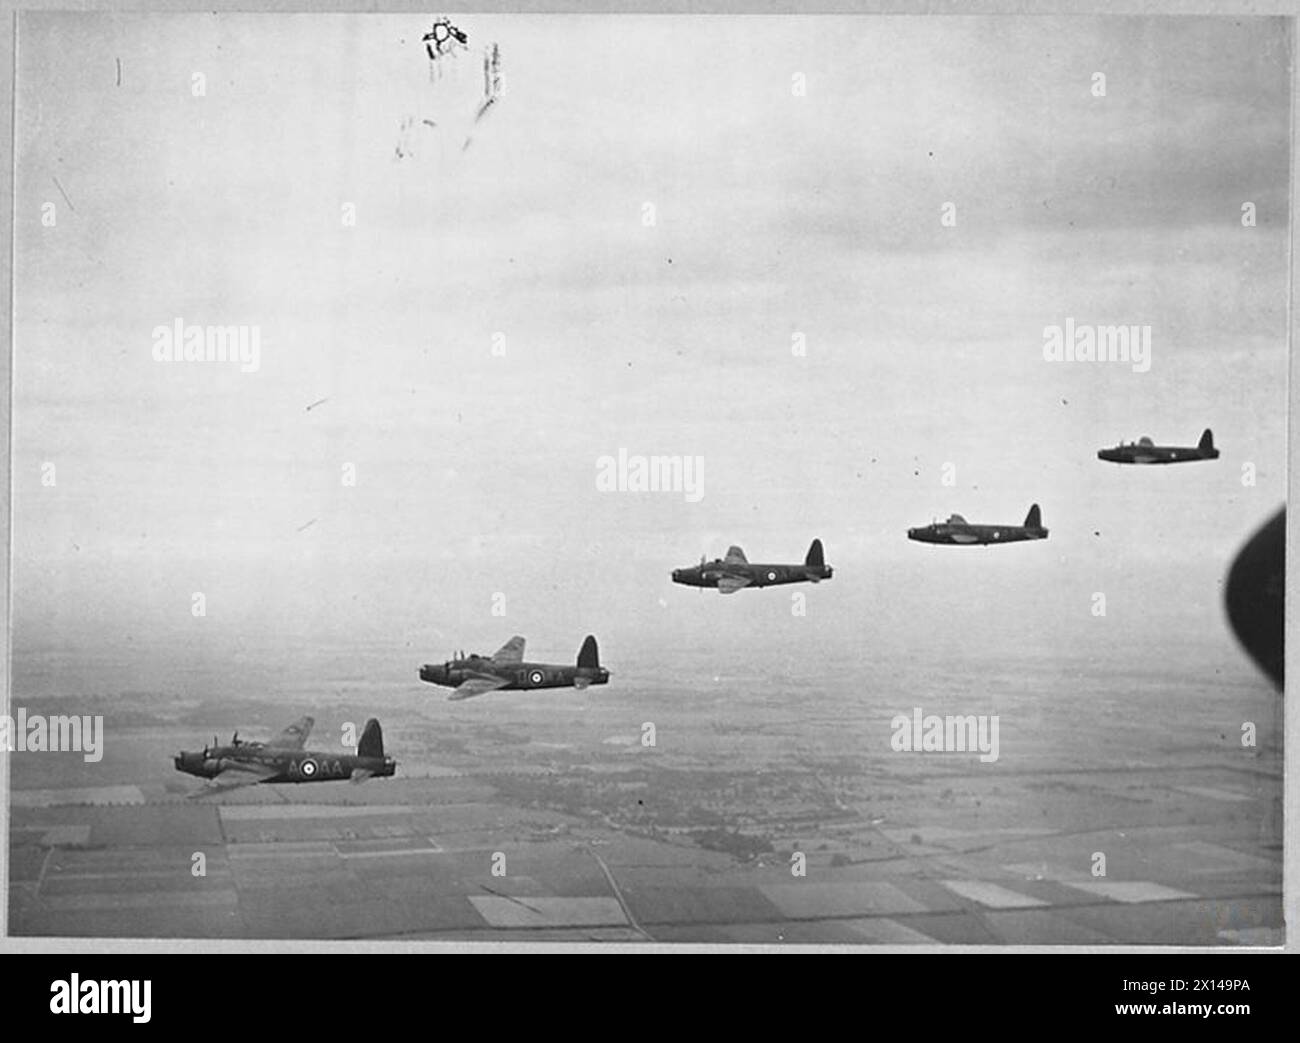 EMPIRE AID TO BRITAIN - Wellington bombers in formation Royal Air Force Stock Photo